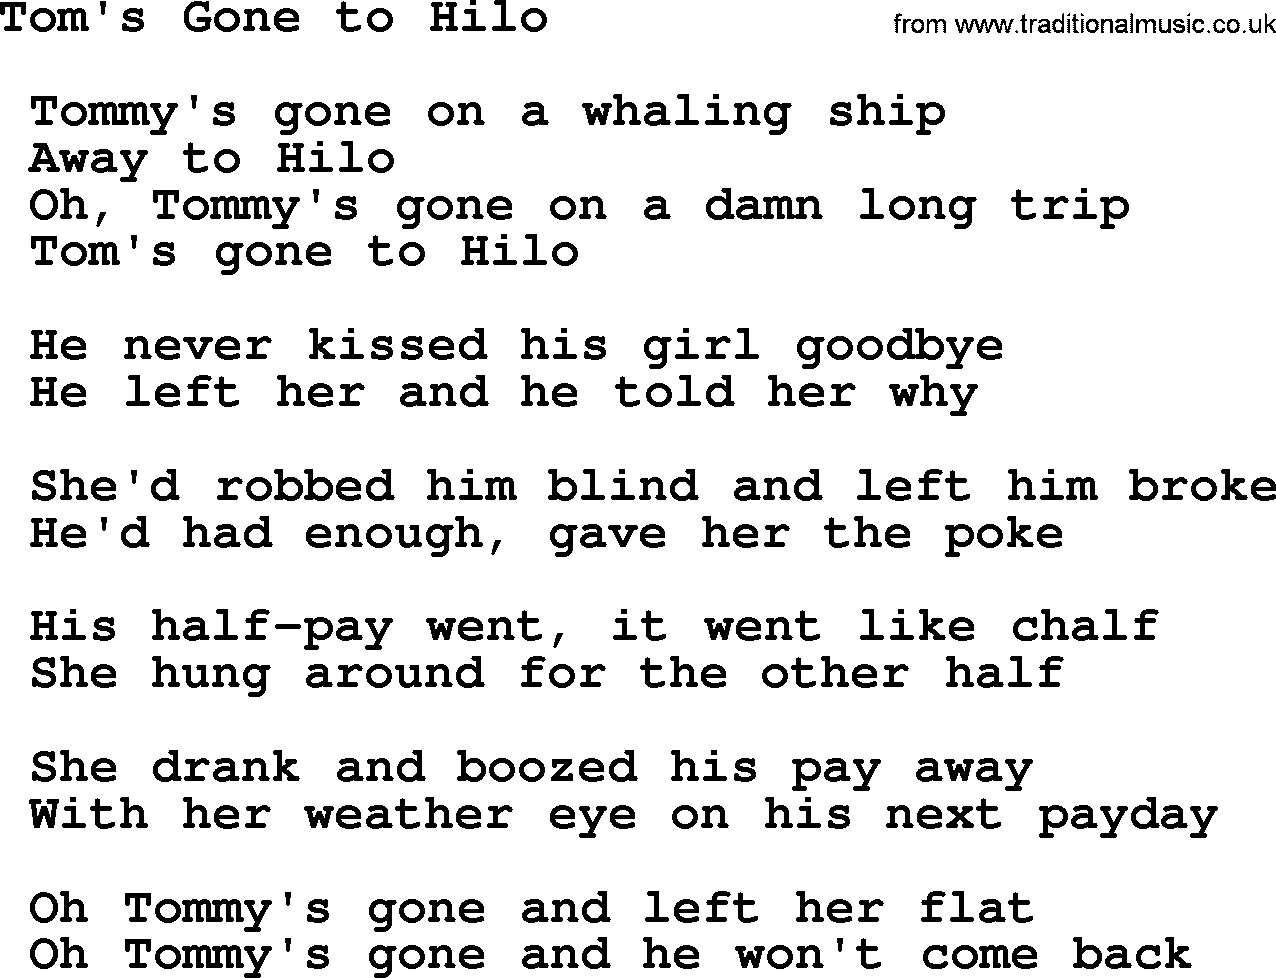 Sea Song or Shantie: Toms Gone To Hilo, lyrics